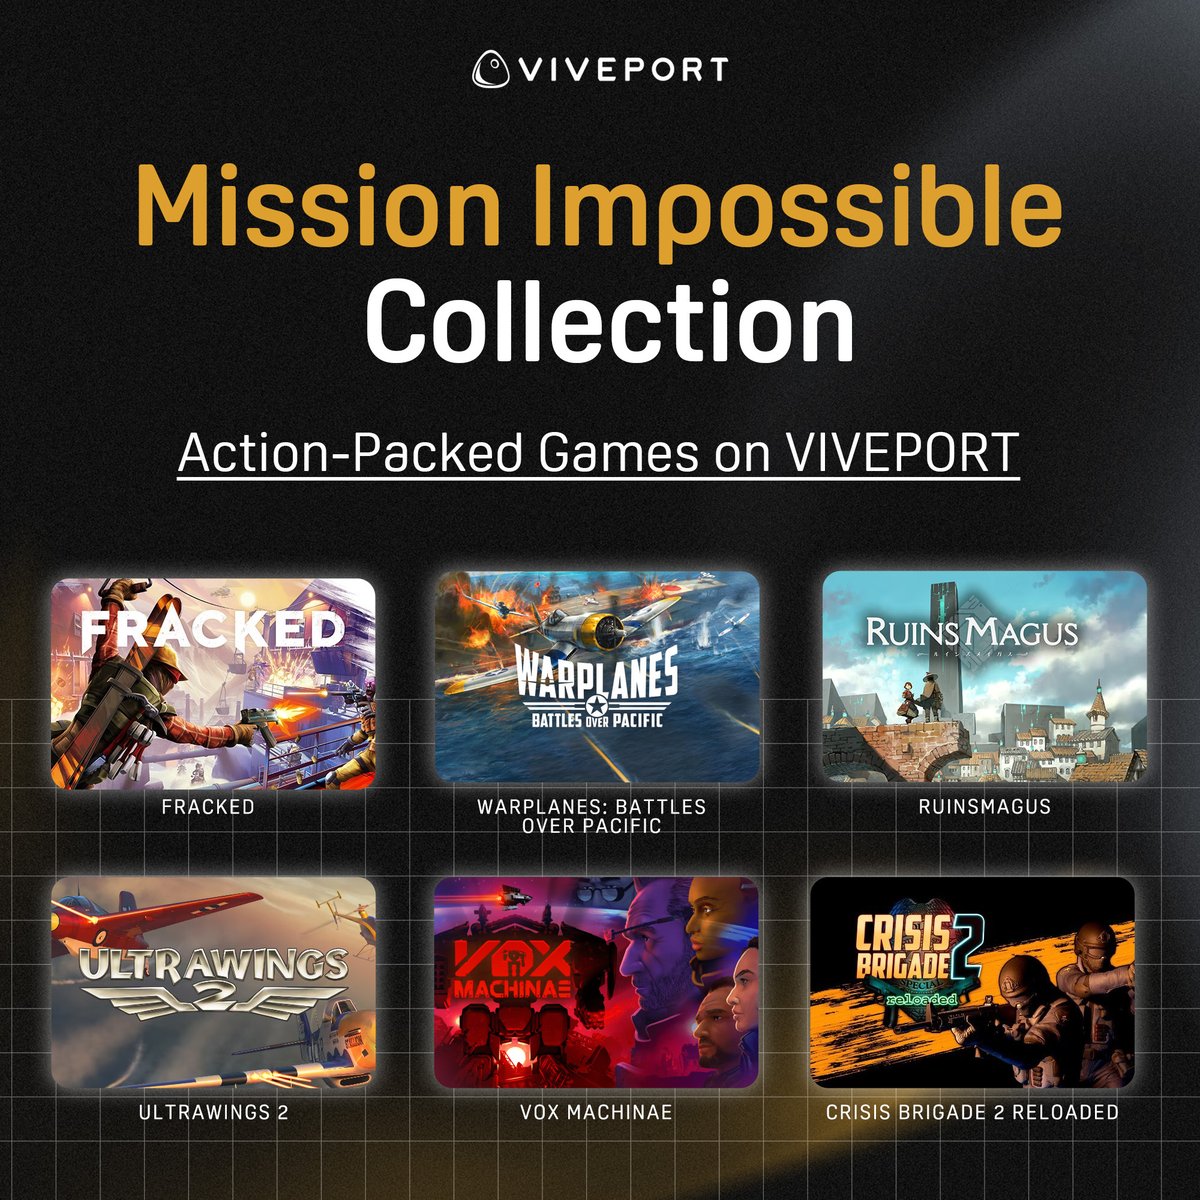 Select your loadout, upgrade your skill tree, or jump into your chosen vehicle in these mission-based games: htcvive.co/VPMICX #ActionGames #VR @nDreams @homenetgames @CharacterBankEN @BitPlanetGames @SpaceBulletCorp #CrisisBrigade